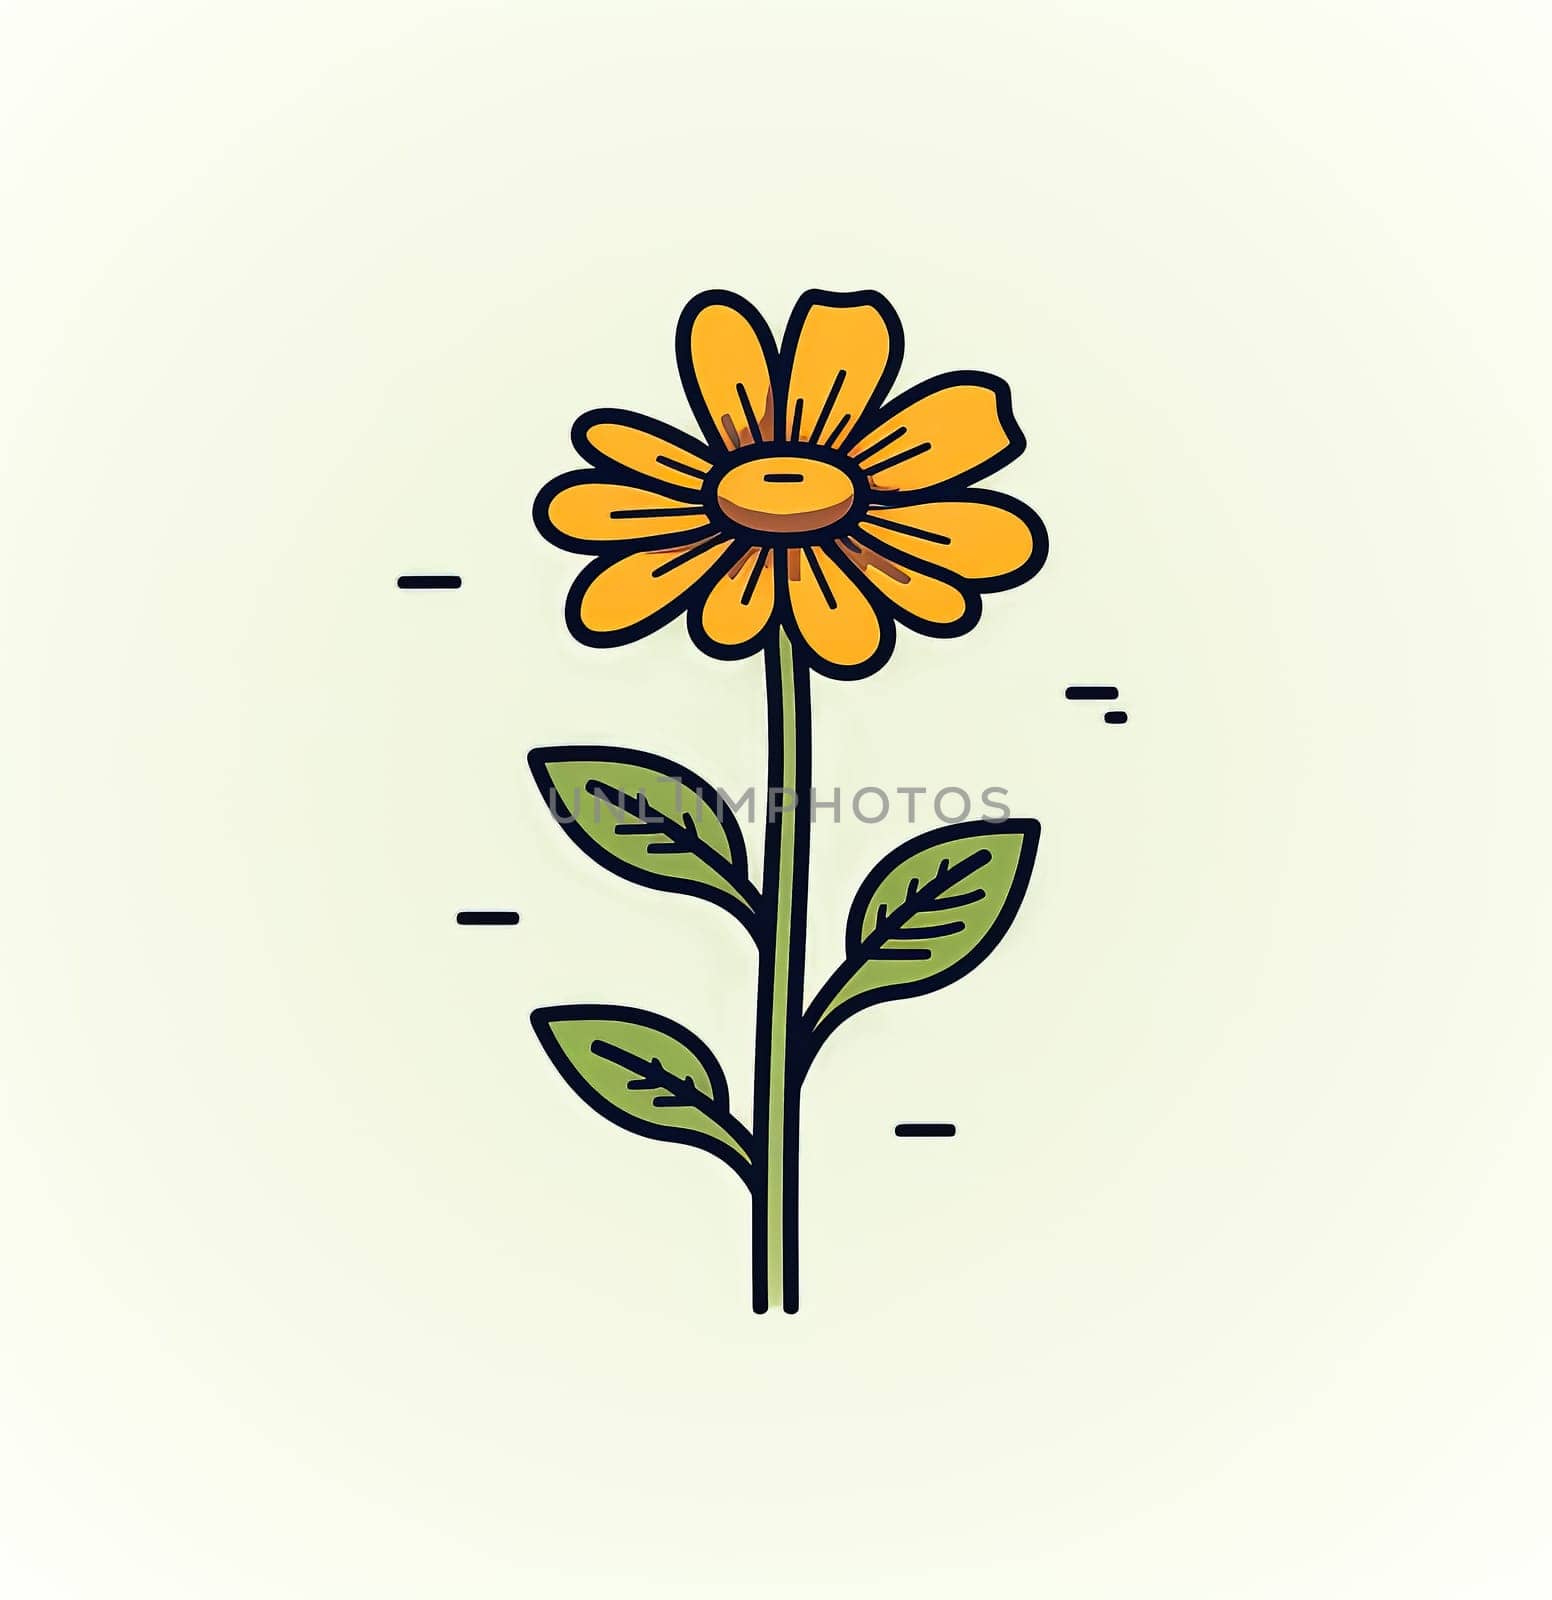 Simple and elegant flower icon, perfect as a sign or symbol for various design purposes.